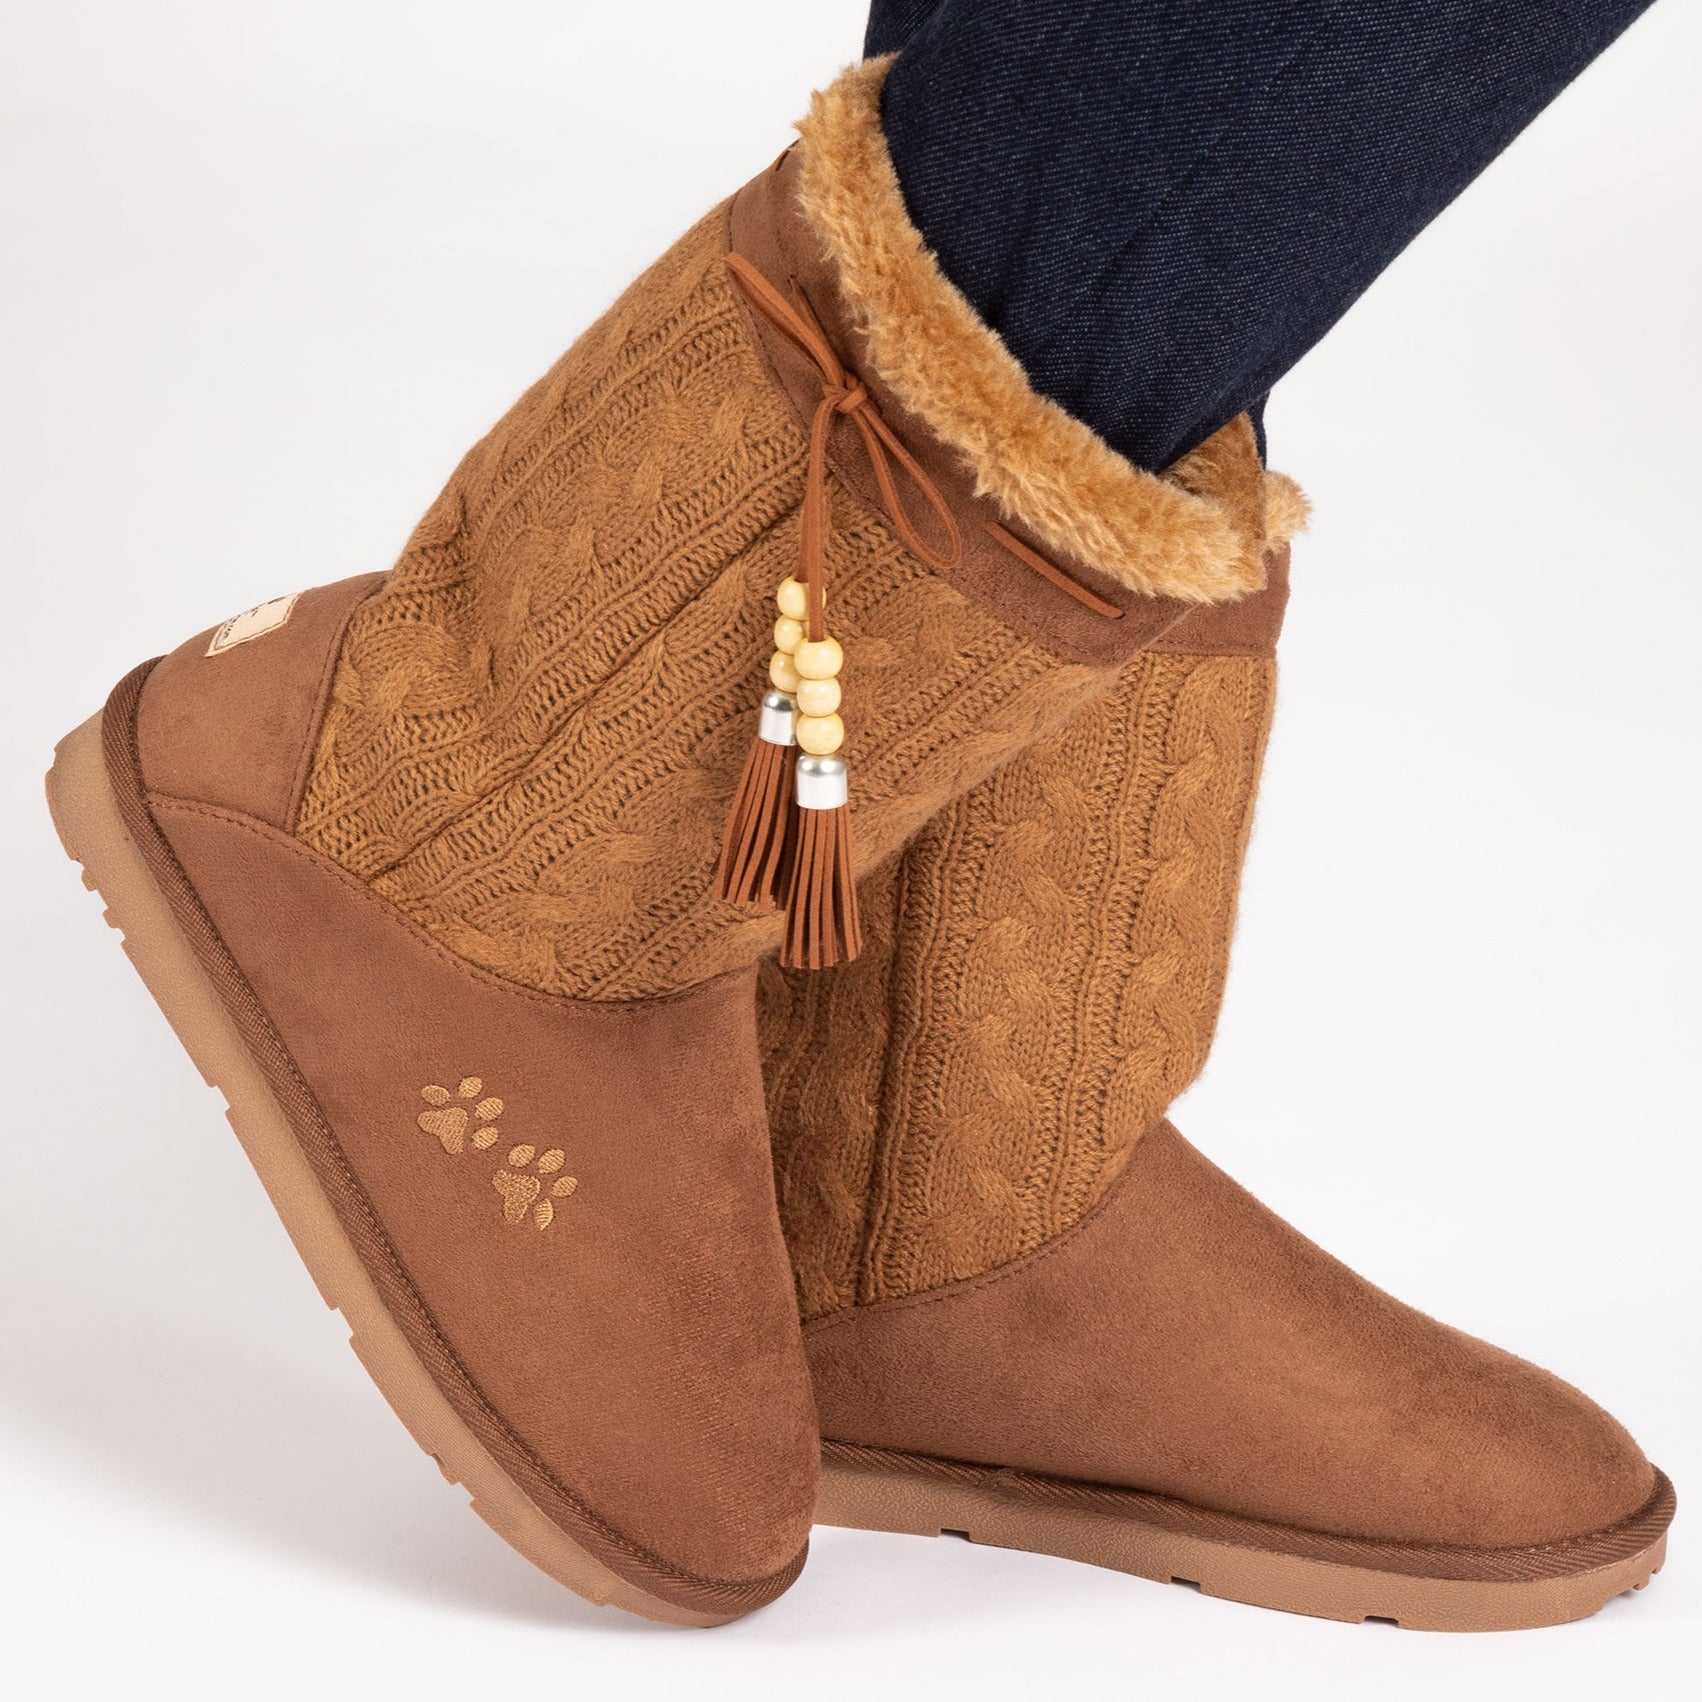 Paw Print Tall Knitted Boots With Beaded Tassels - Tan - 8